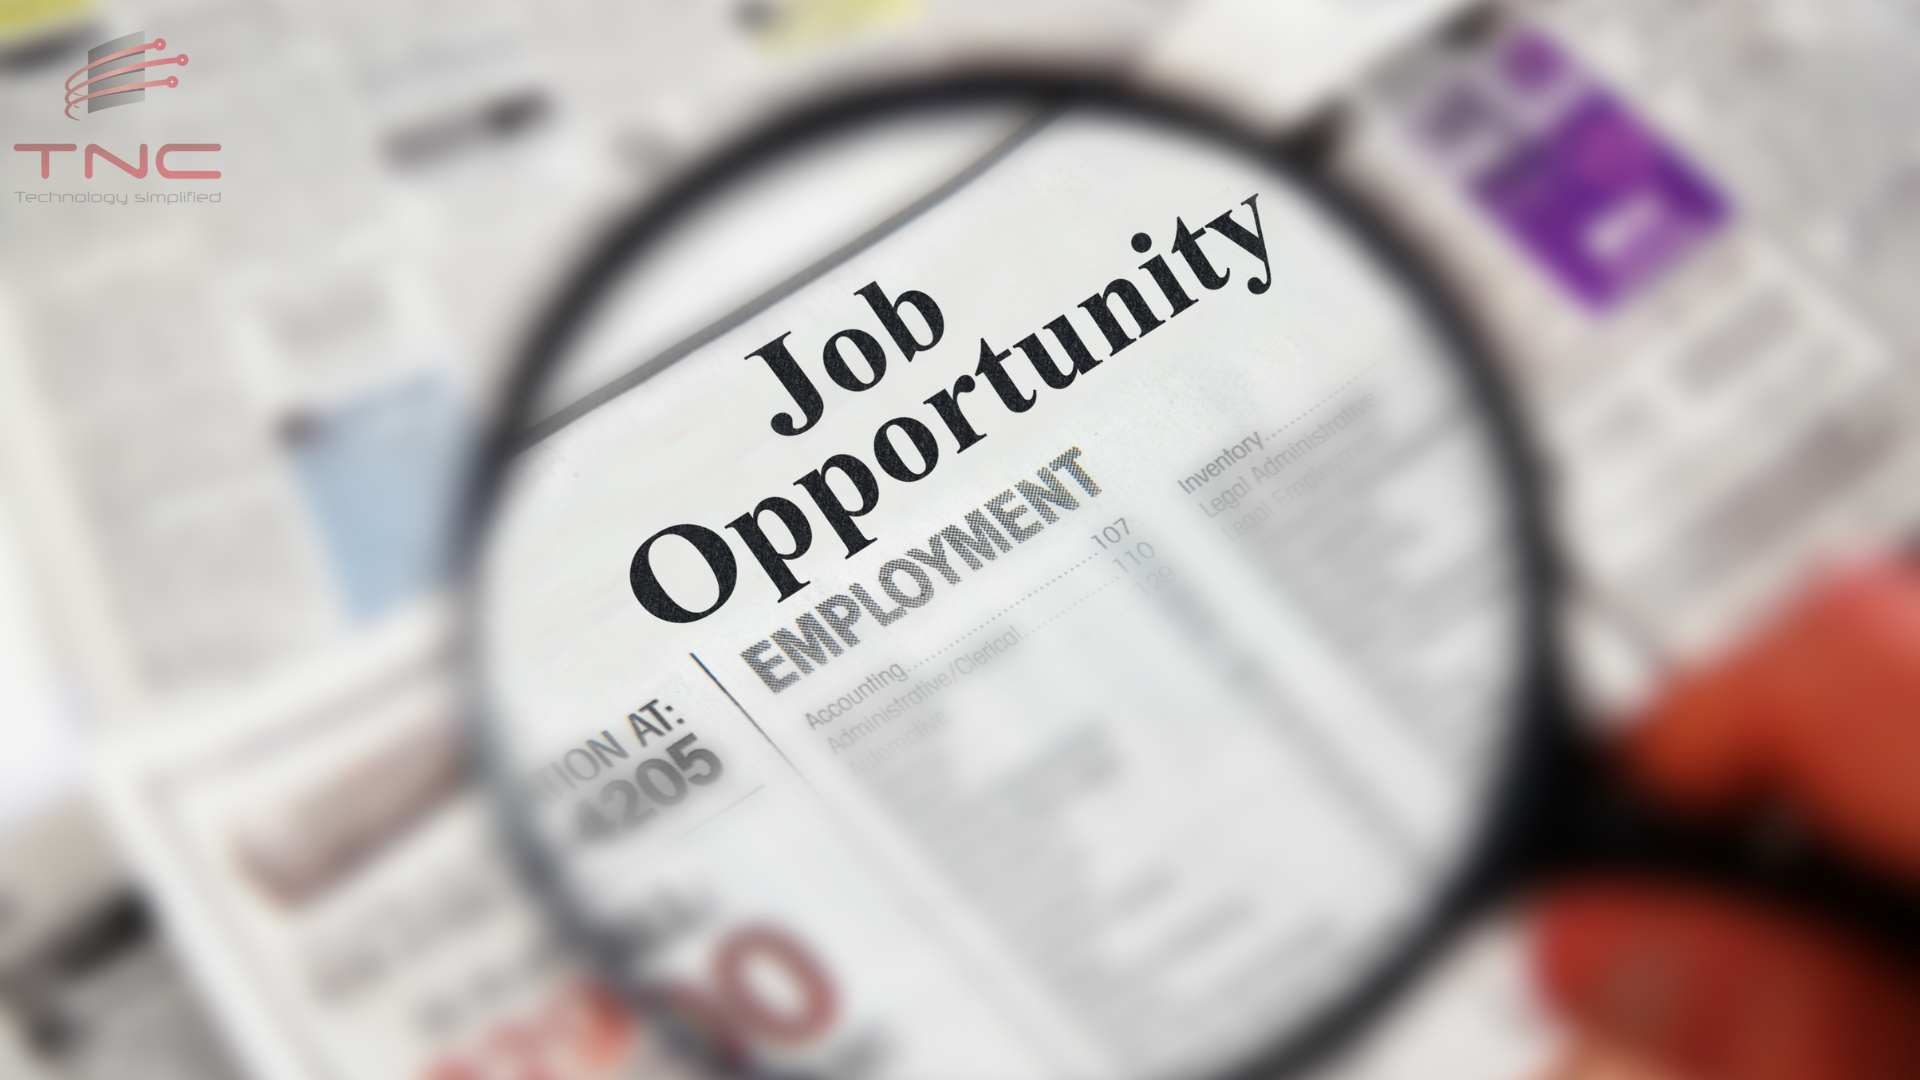 A news paper with "job opportunity" focused on a magnifying glass